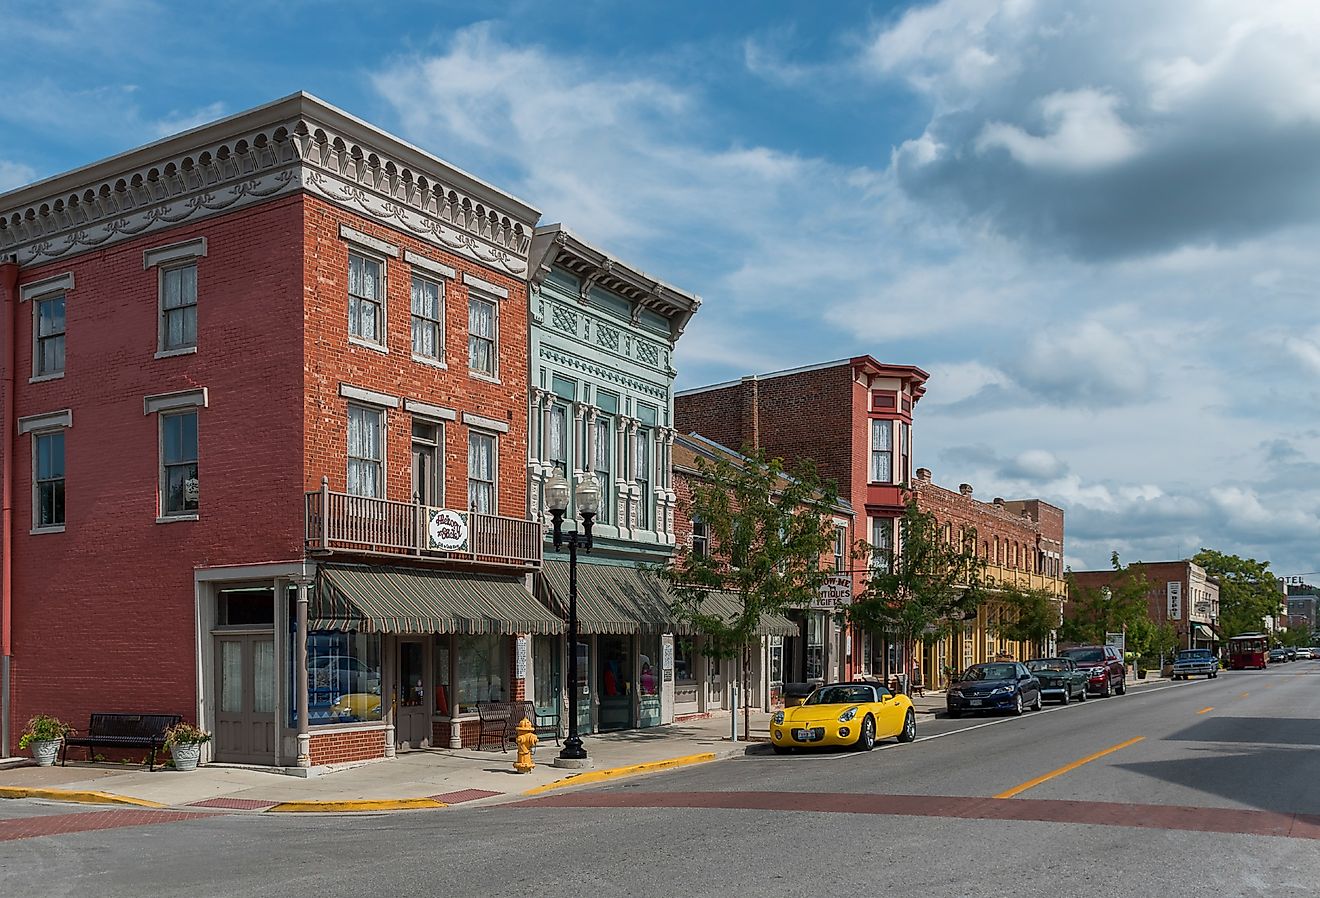 Rustic brick buildings along the North Main Street Historic District in Hannibal, Missouri. Image credit Nagel Photography via Shutterstock.com